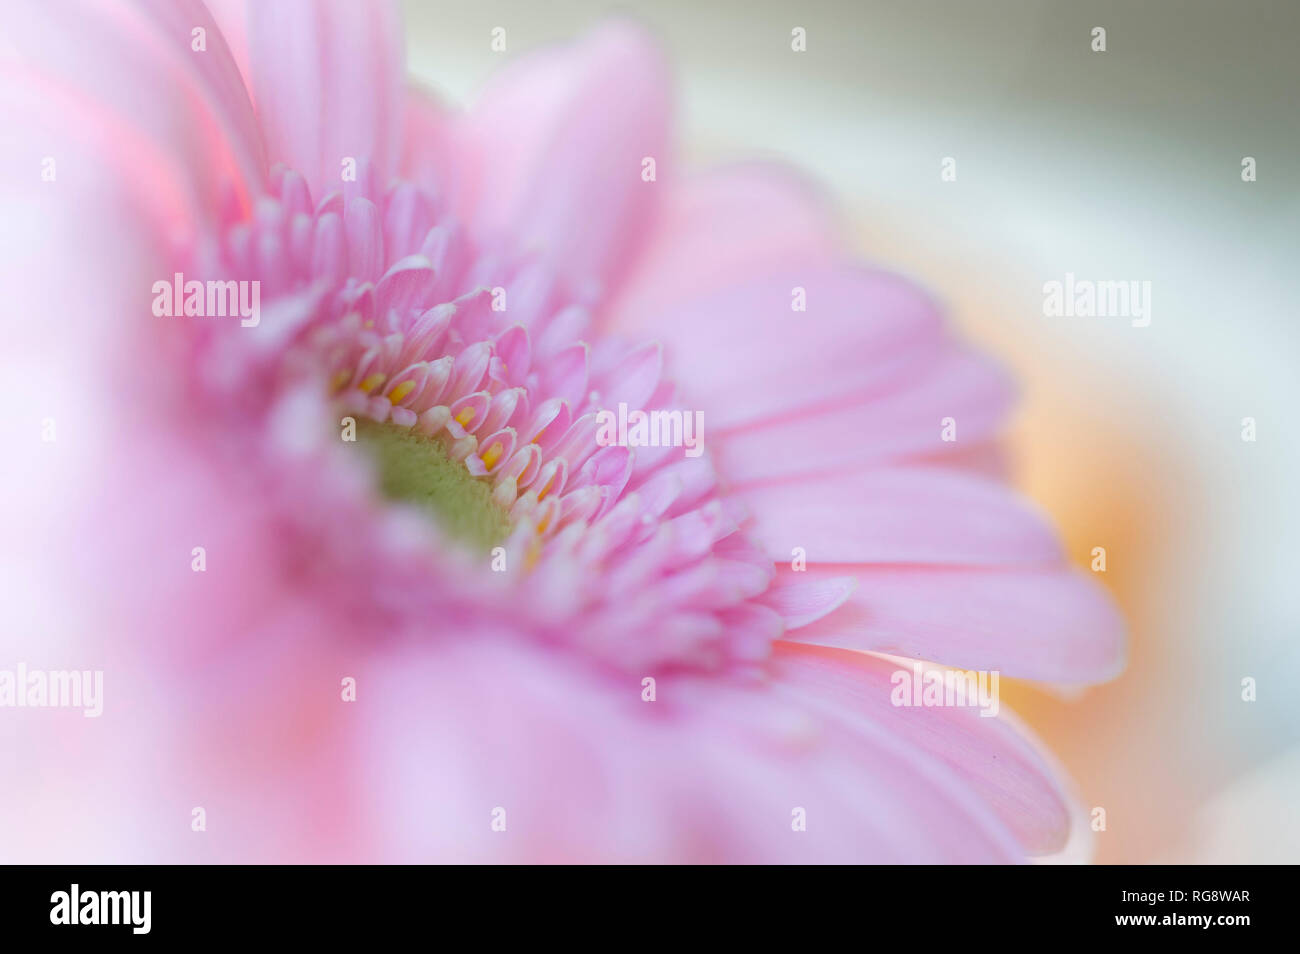 A close up view of a Gerbera flower. Stock Photo